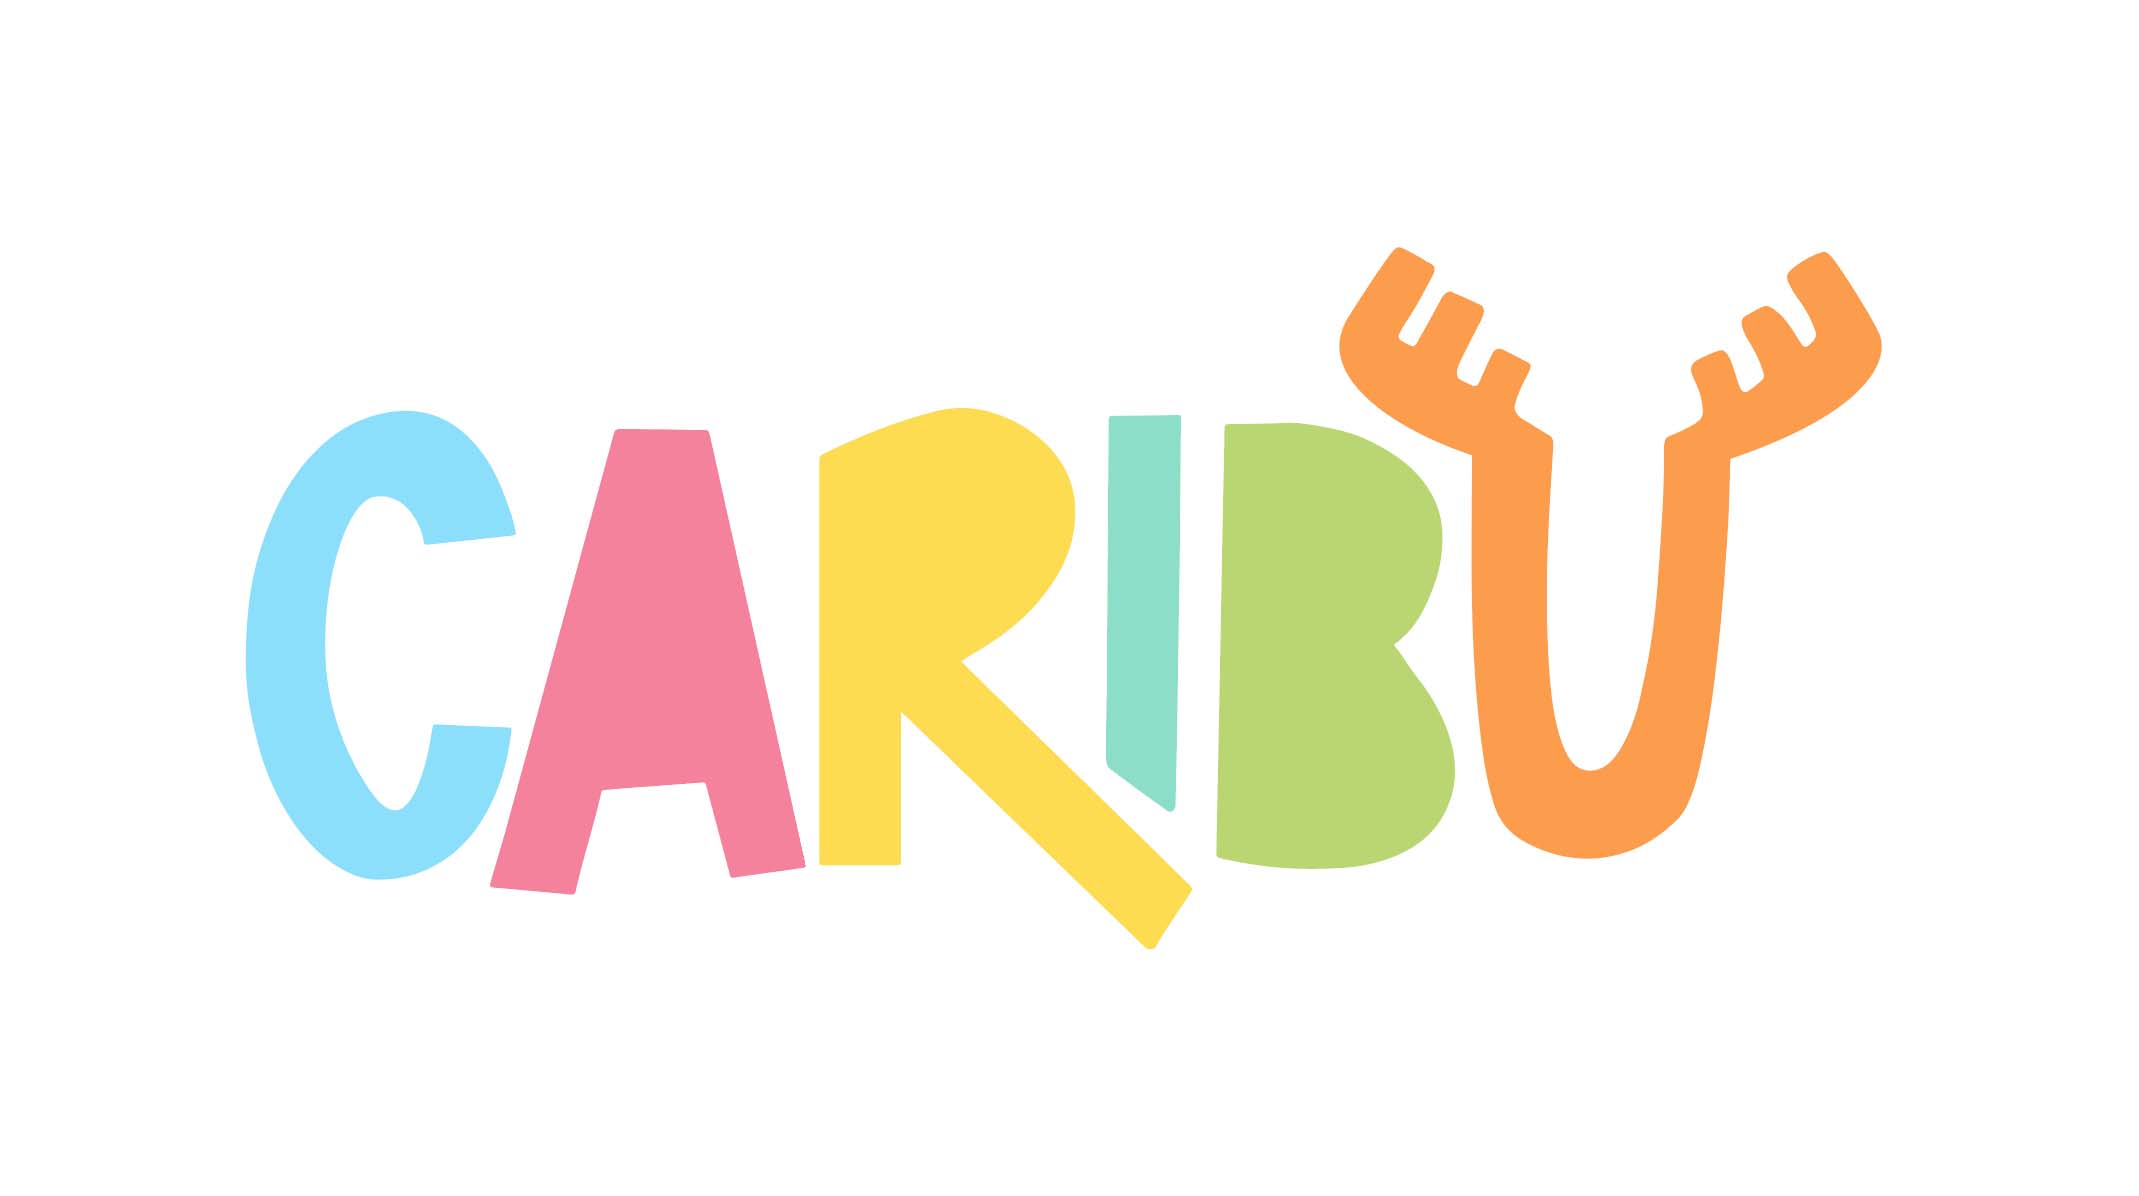 Caribu logo design by logo designer hudson rouge for your inspiration and for the worlds largest logo competition